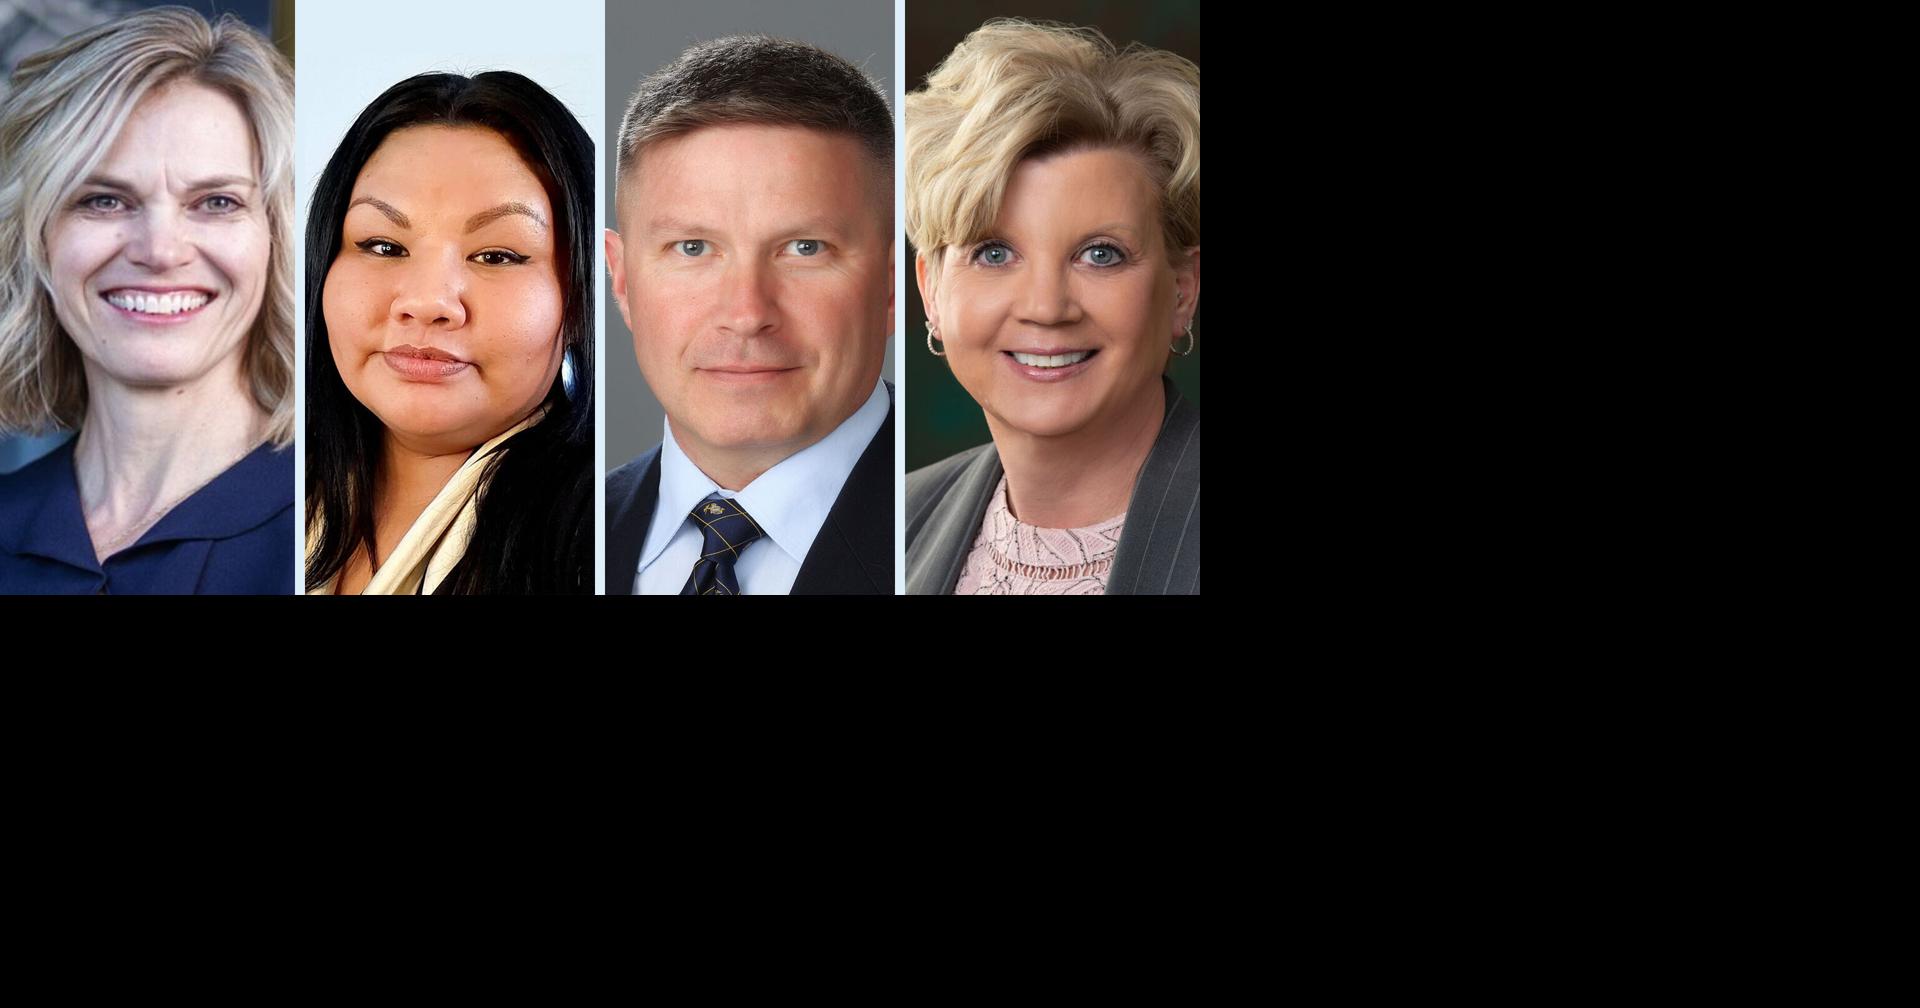 North Dakota Public Service Commission candidates to face off in November election